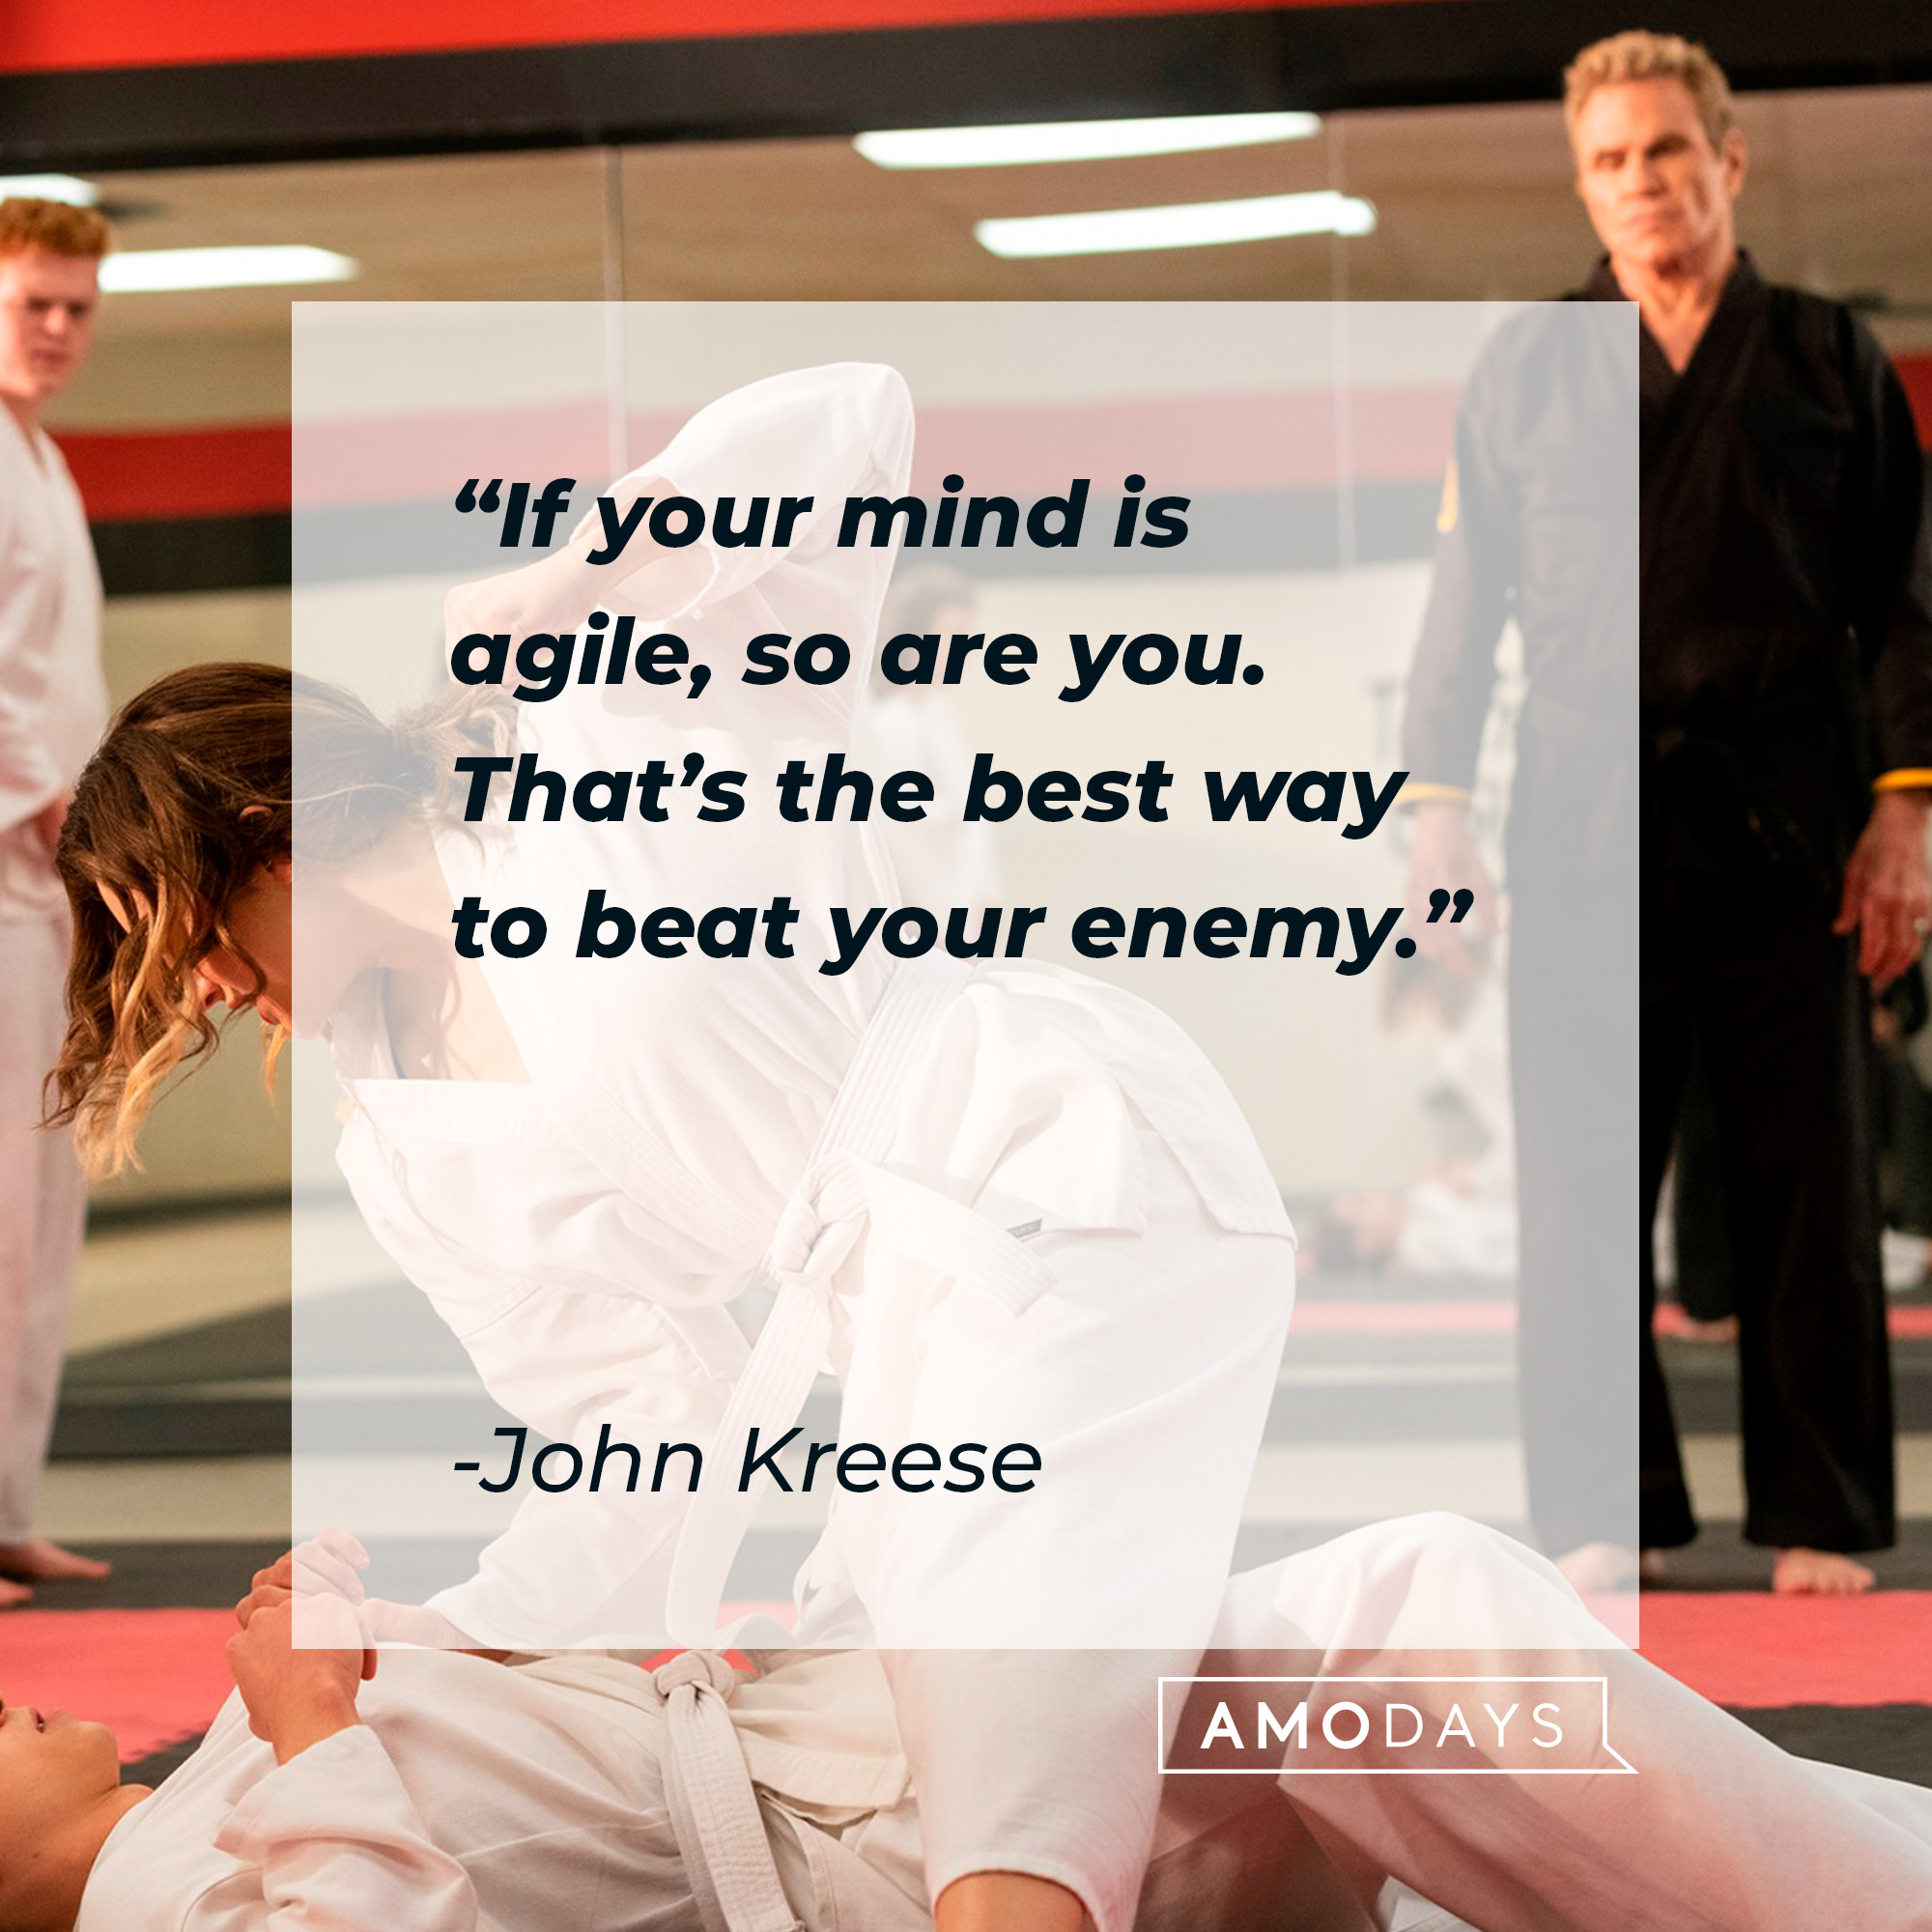 Children practice Karate, with John Creese in the background, with his quote: “If your mind is agile, so are you. That’s the best way to beat your enemy.” │Source: facebook.com/CobraKaiSeries